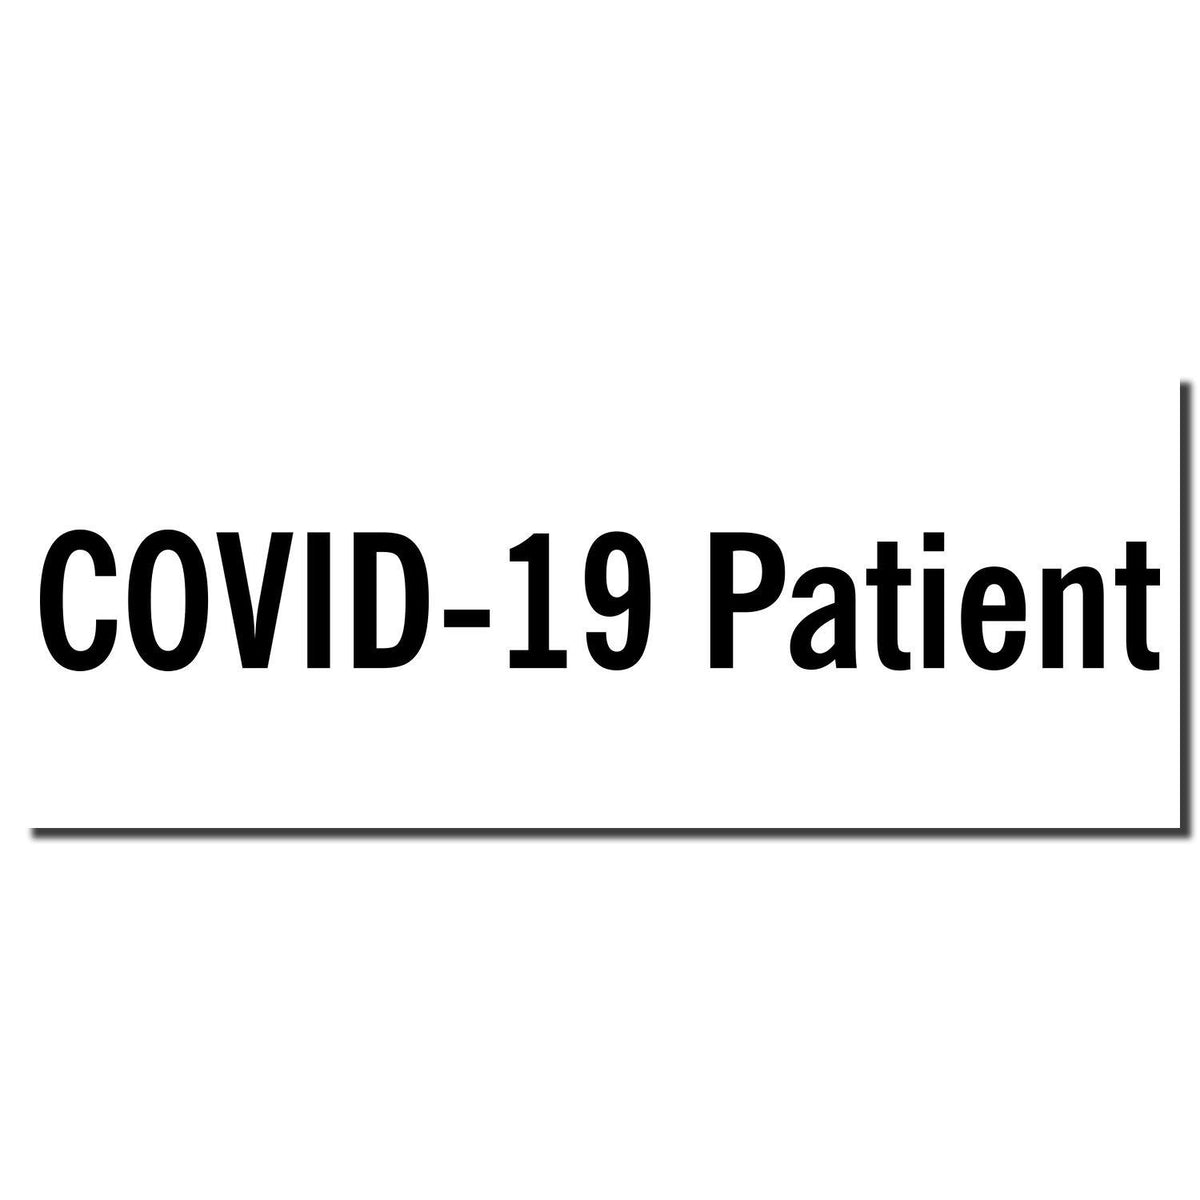 Enlarged Imprint Large Covid-19 Patient Rubber Stamp Sample